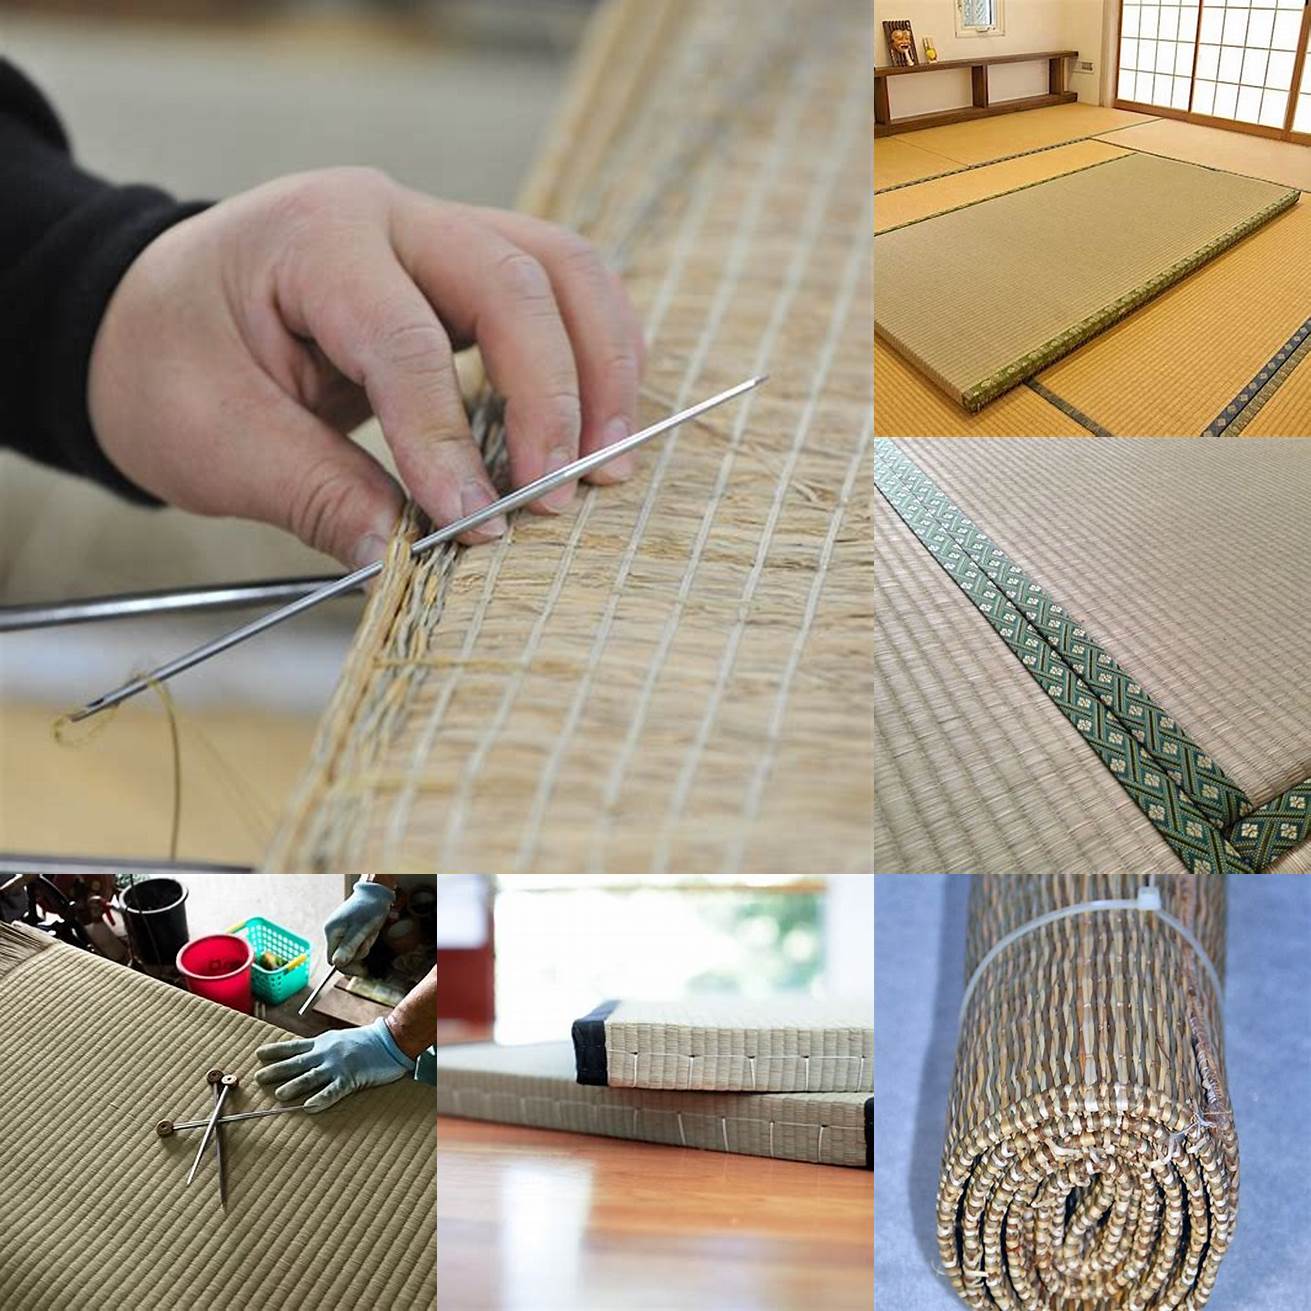 A close-up of the weaving process used to make tatami mats